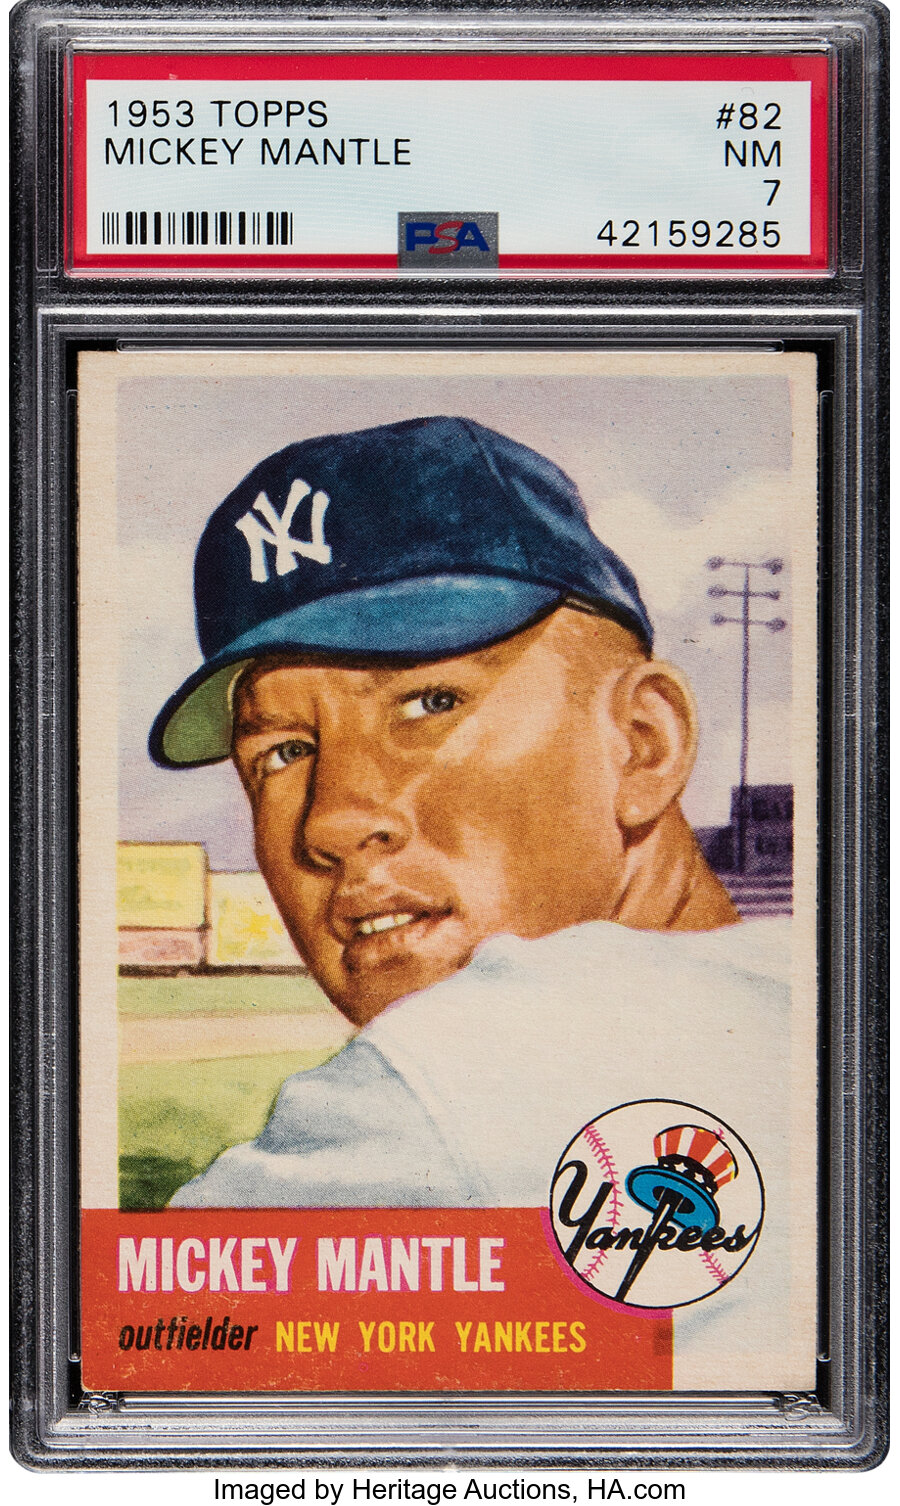 1953 Topps Mickey Mantle #82 PSA NM 7